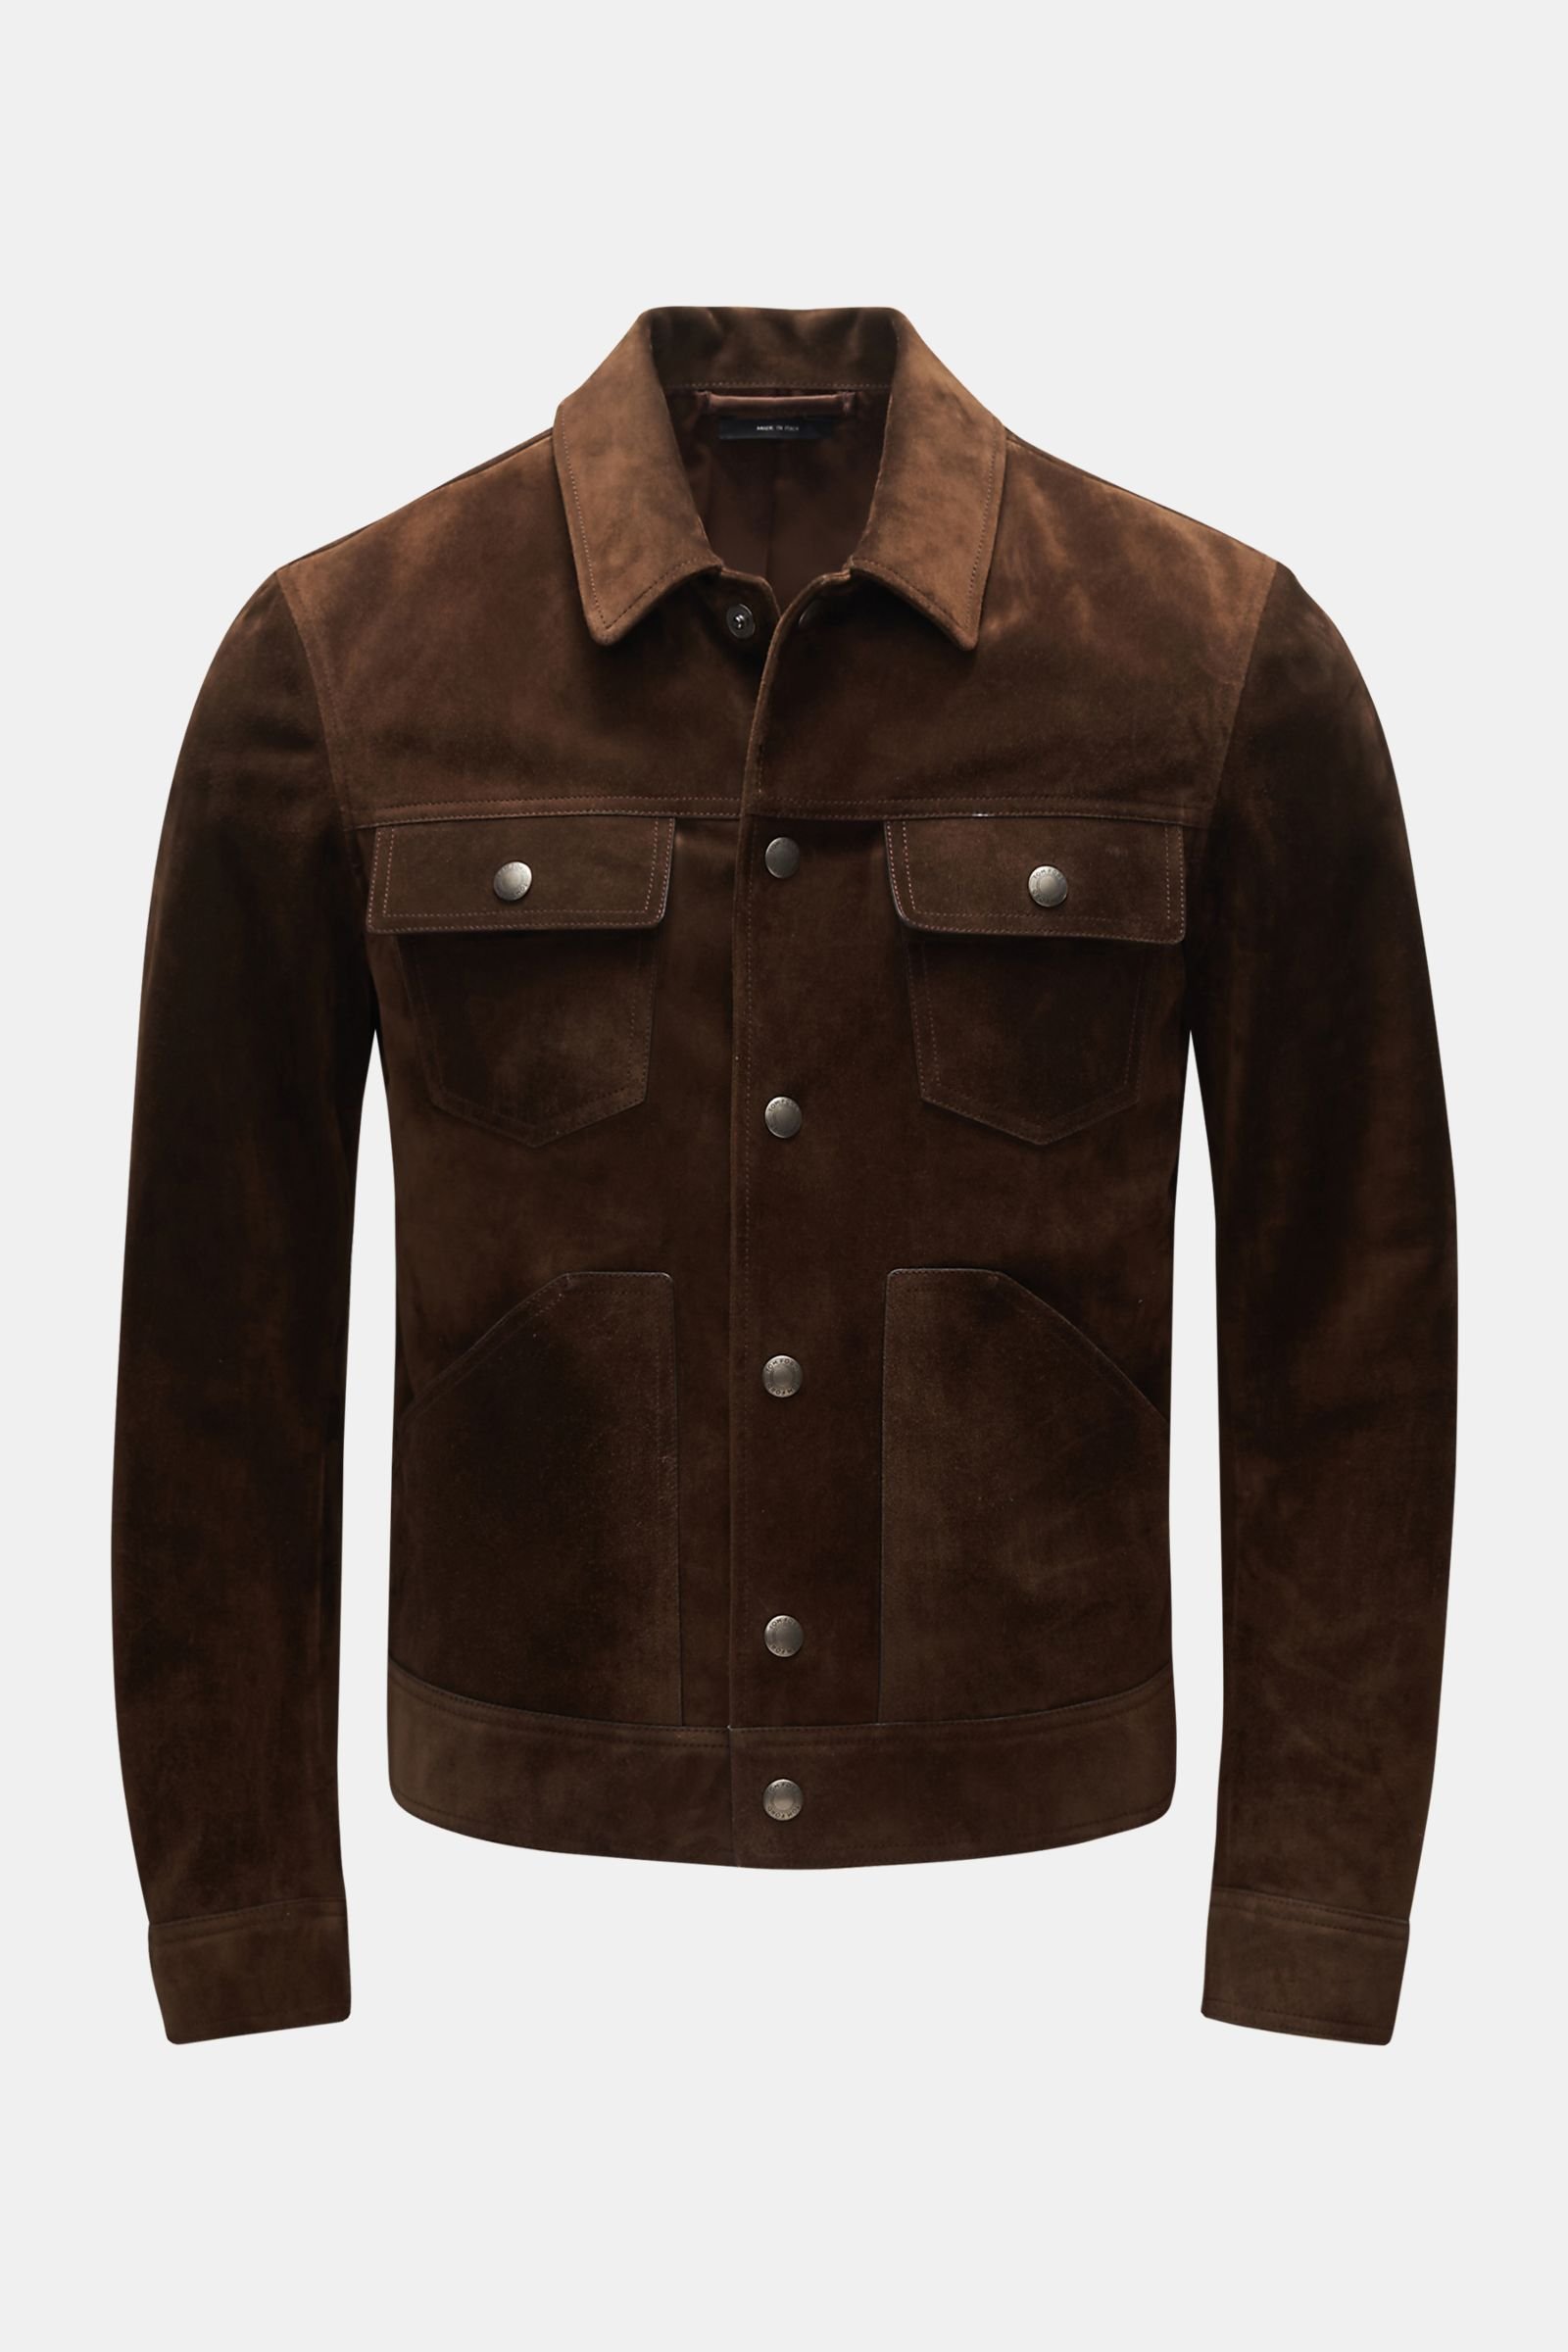 Tom Ford Suede Jacket - www.inf-inet.com